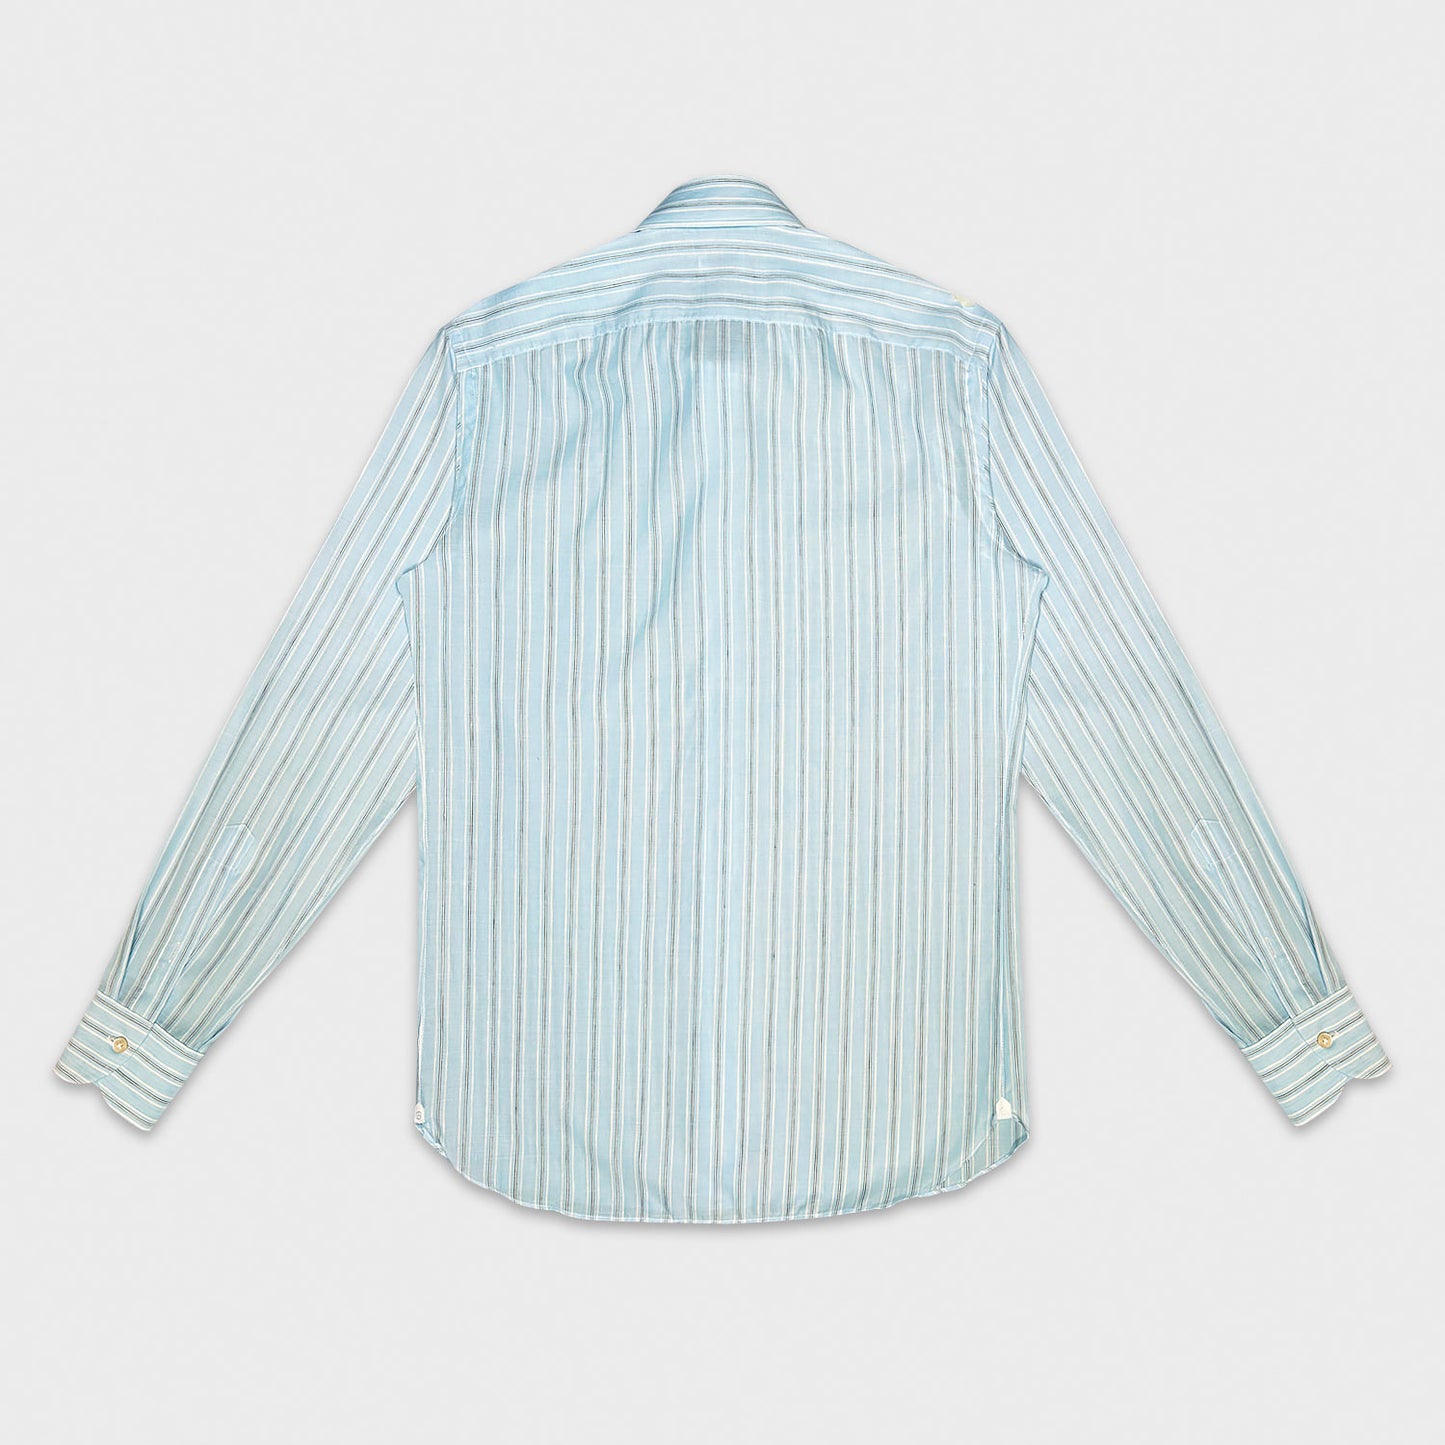 Neutral color edgewater striped shirt men, handmade Borriello Napoli shirt exclusive for Wools Boutique Uomo, light muslin cotton, easy to match with many classic ties and jackets, a refined alternative to the white shirt.